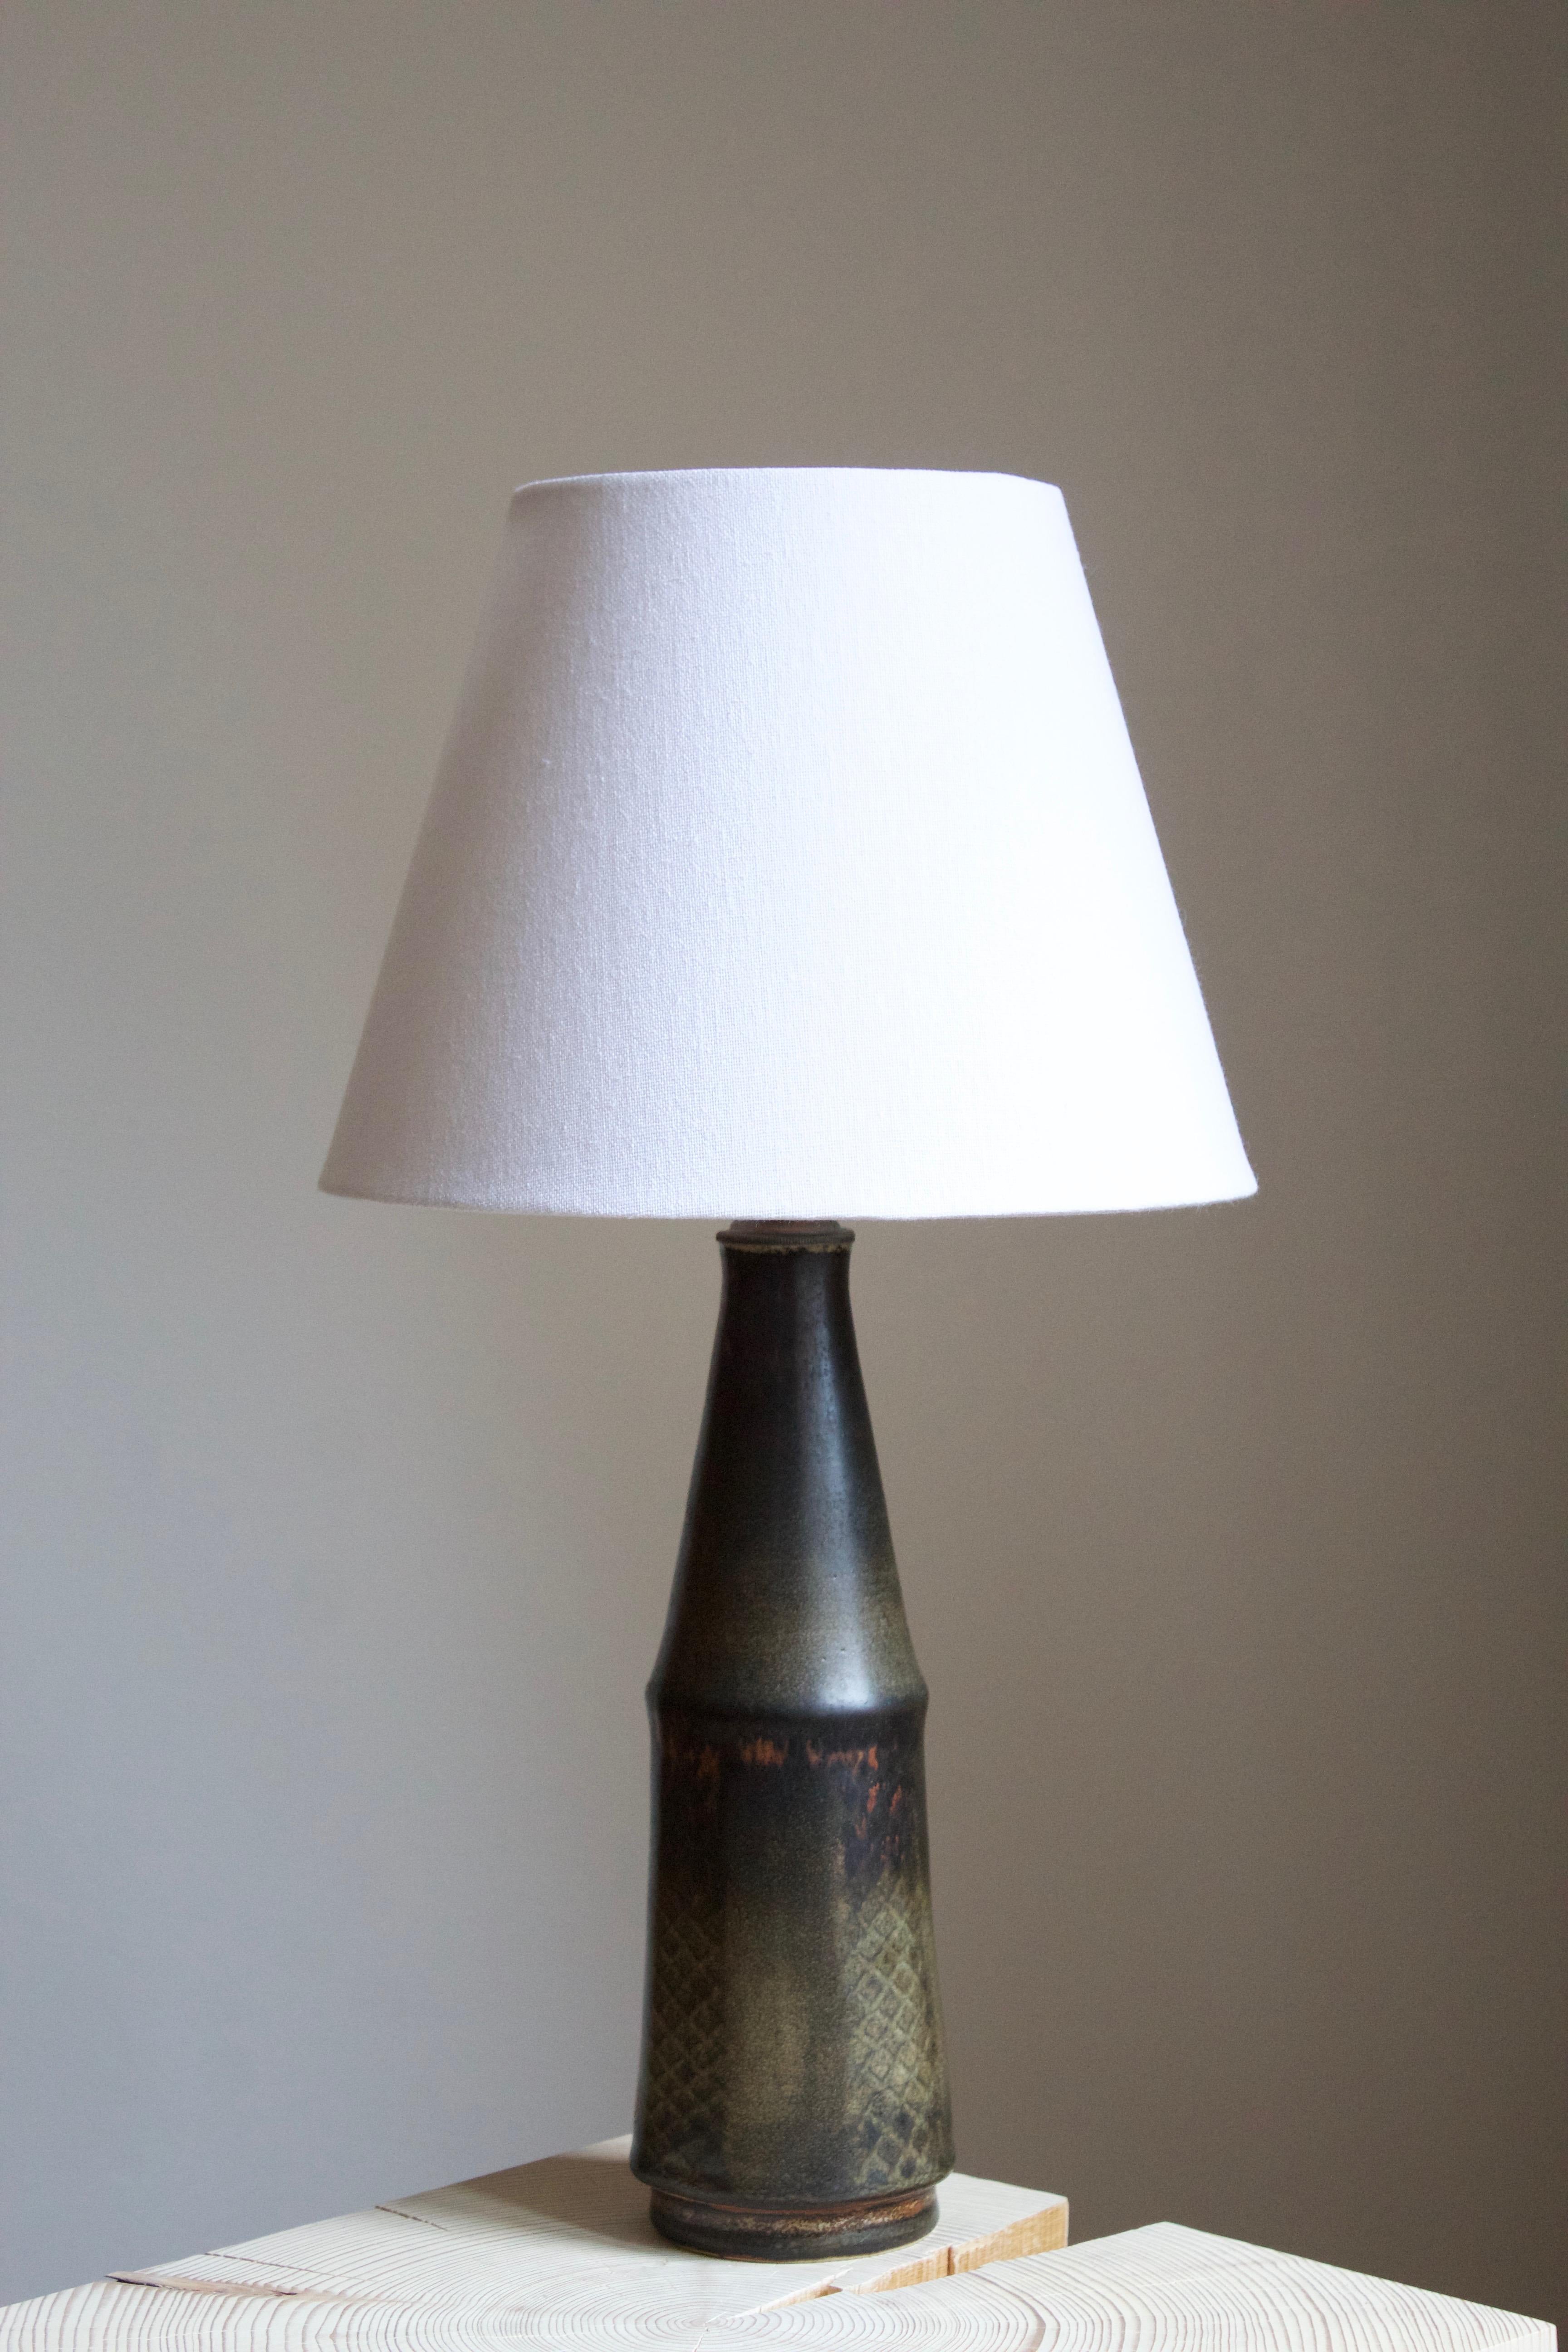 A unique table lamp by Carl-Harry Stålhane for the iconic Swedish firm Rörstrand. Signed. Features a complex and artistic glaze aswell as subtle incised decor.

Stated dimensions exclude lampshade. Height includes the socket. Sold without